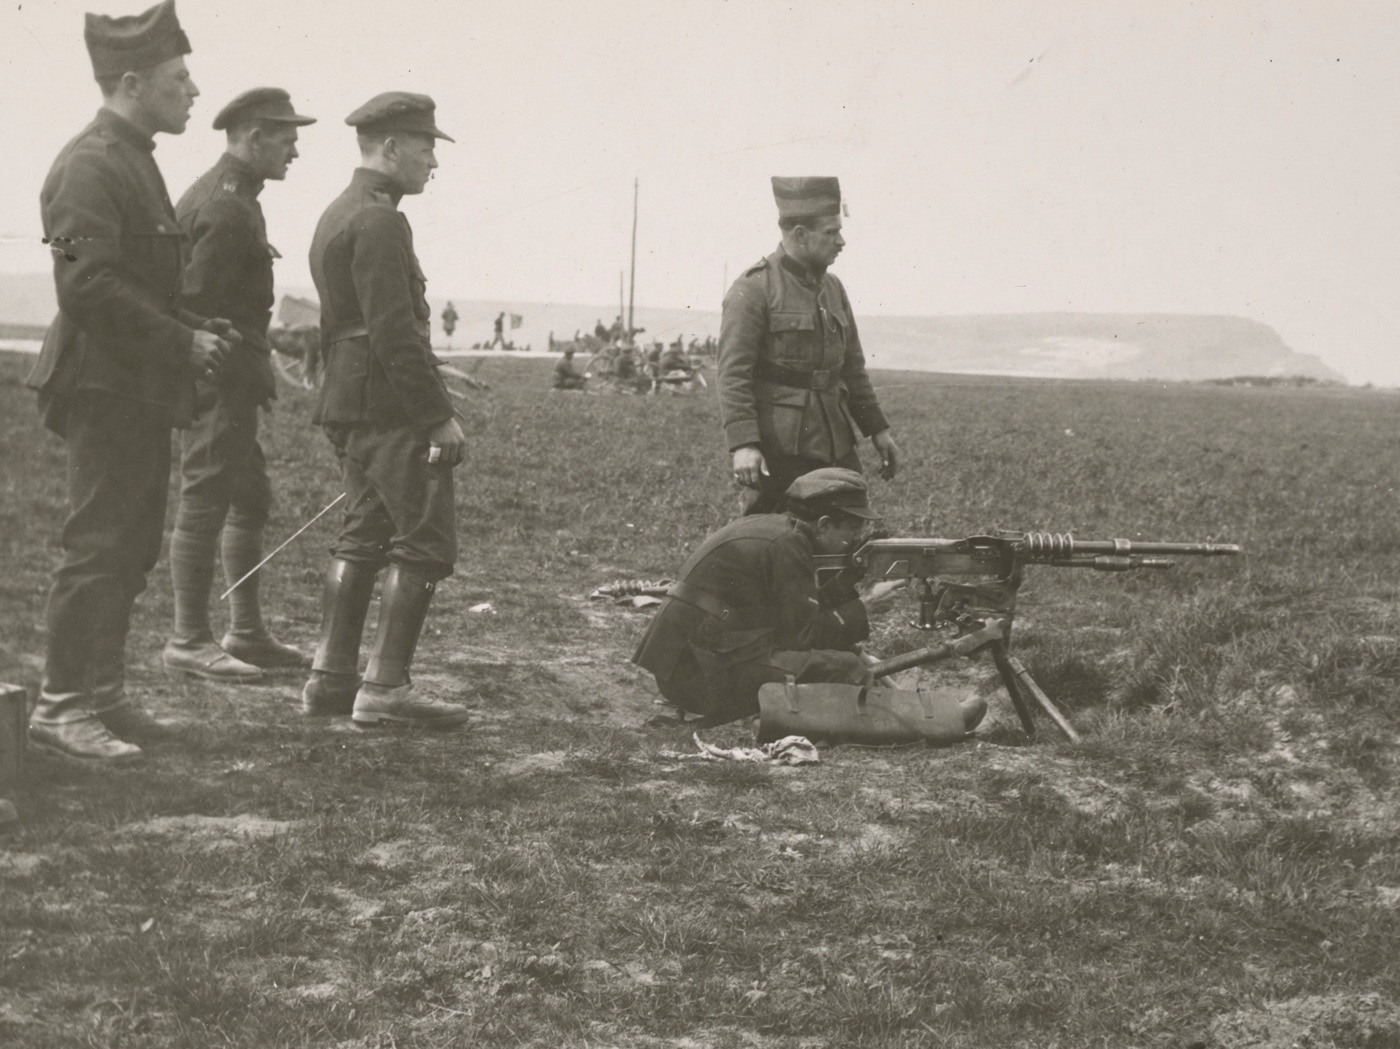 Shown in this image are a group of Belgian soldiers on a firing range training with Hotchkiss machine guns in 8mm Lebel. In addition to being in active service with the French Army, the Americans, Belgians and other Allied countries used the crew served weapon.